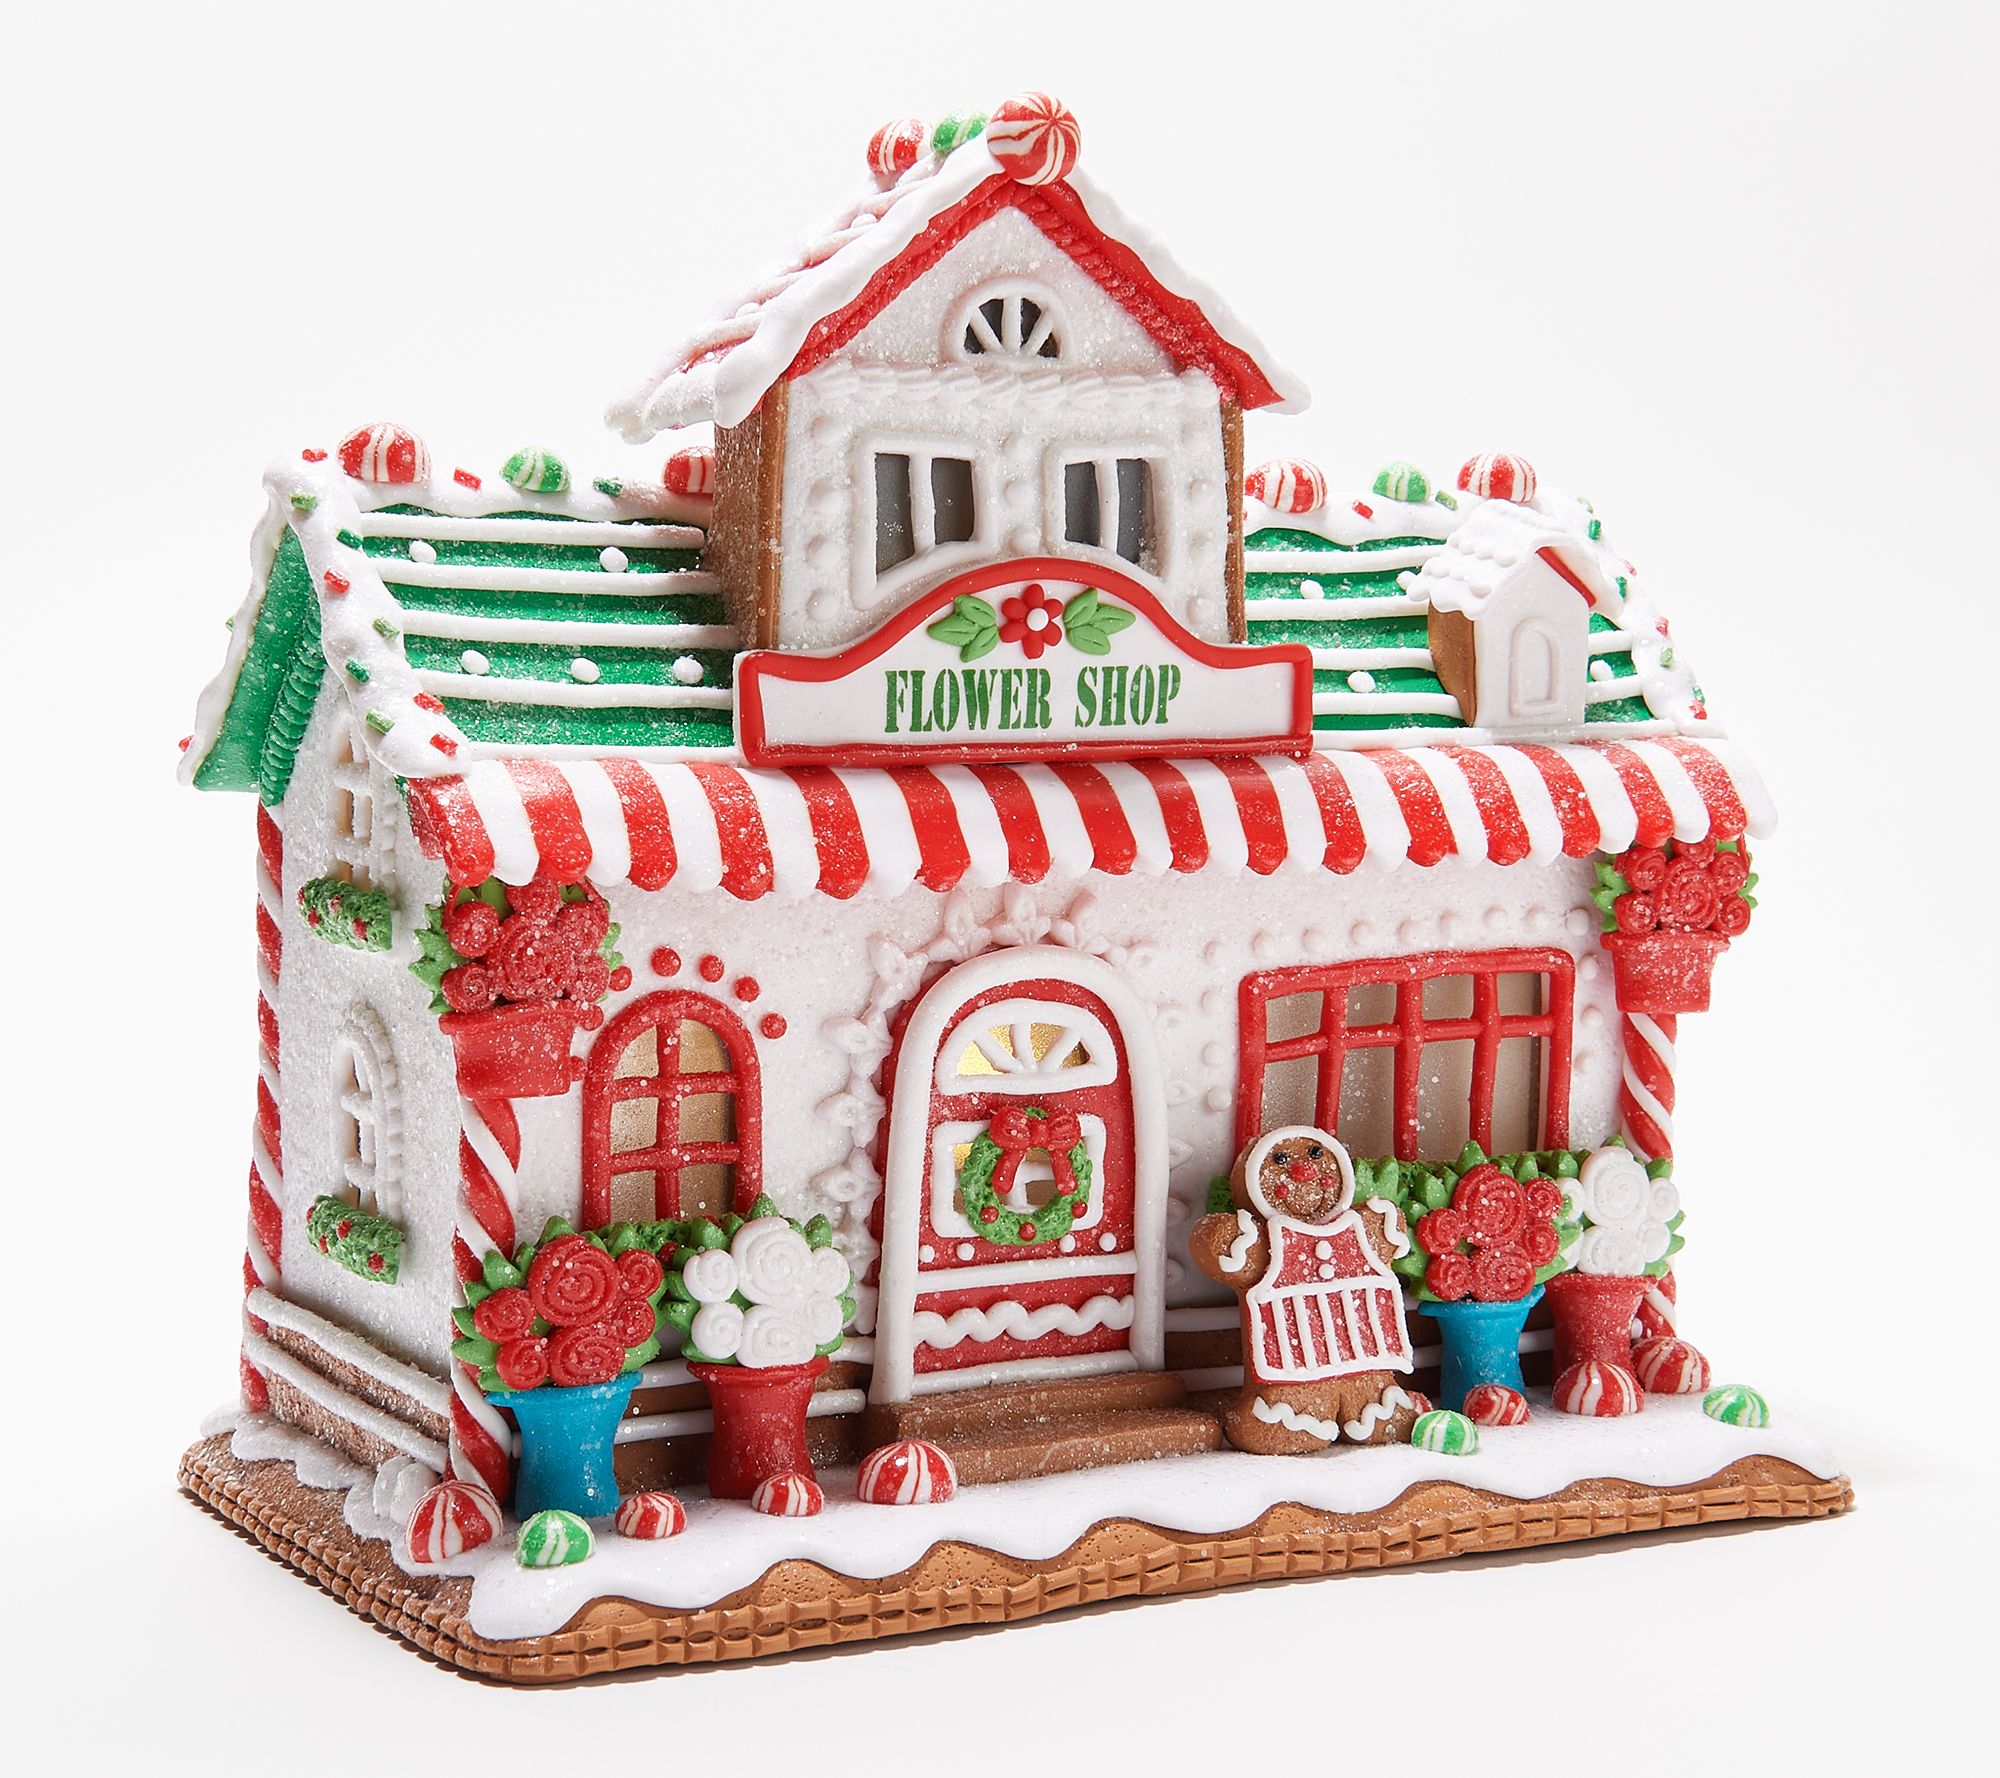 illuminated-townsquare-gingerbread-flower-shop-by-valerie-qvc